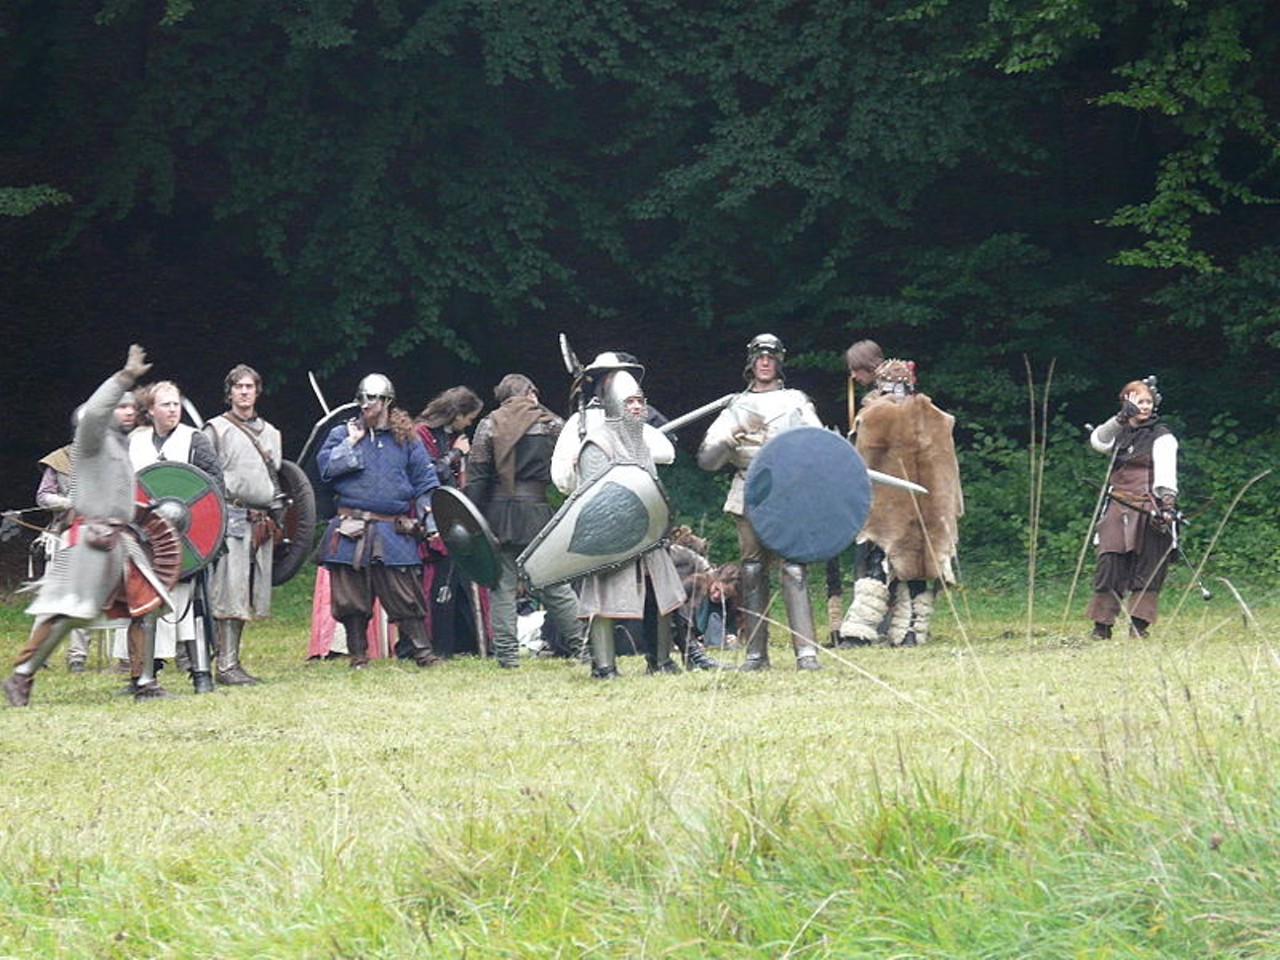 Landover LARP aims to create a permanent medieval society for LARPers. The plans are to make the area, based in Ashland, as authentic as possible,  to make the role-play battles more authentic.